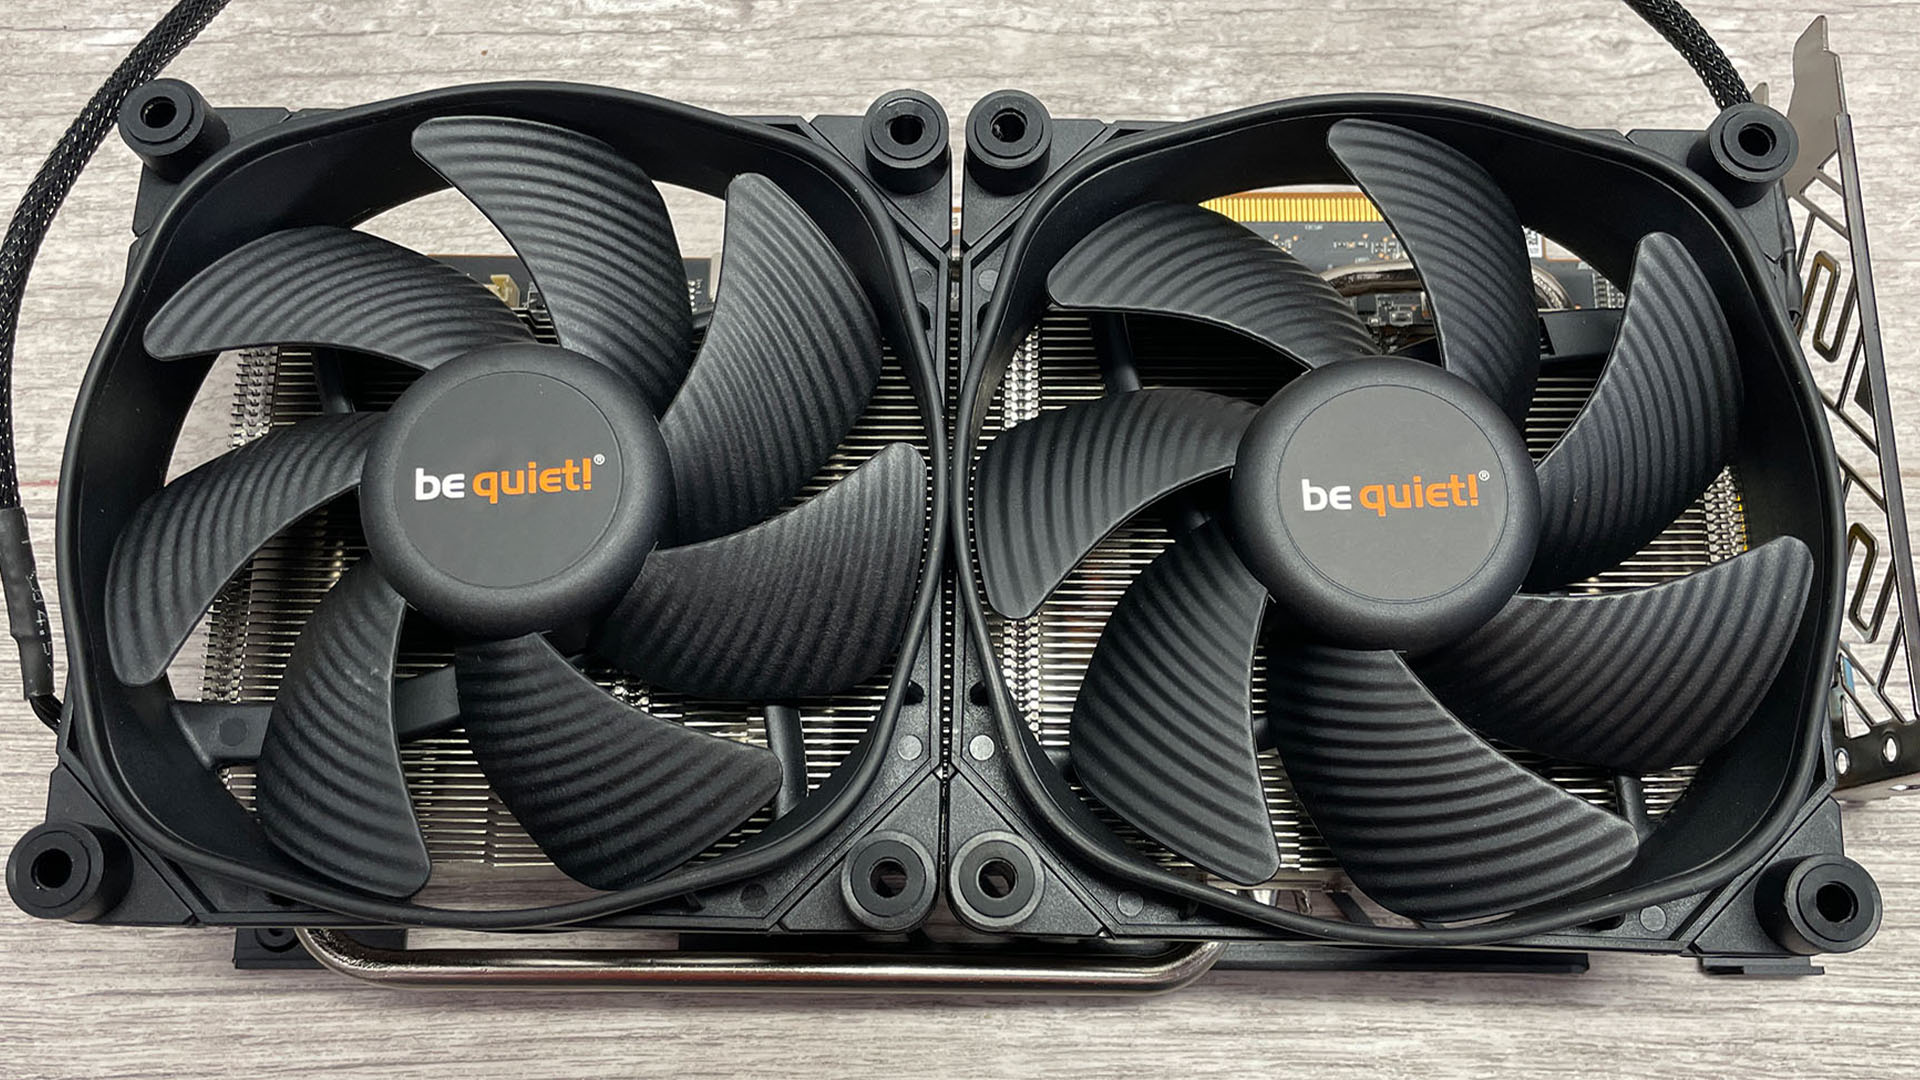 How Much Power Does A 120mm Case Fan Use?